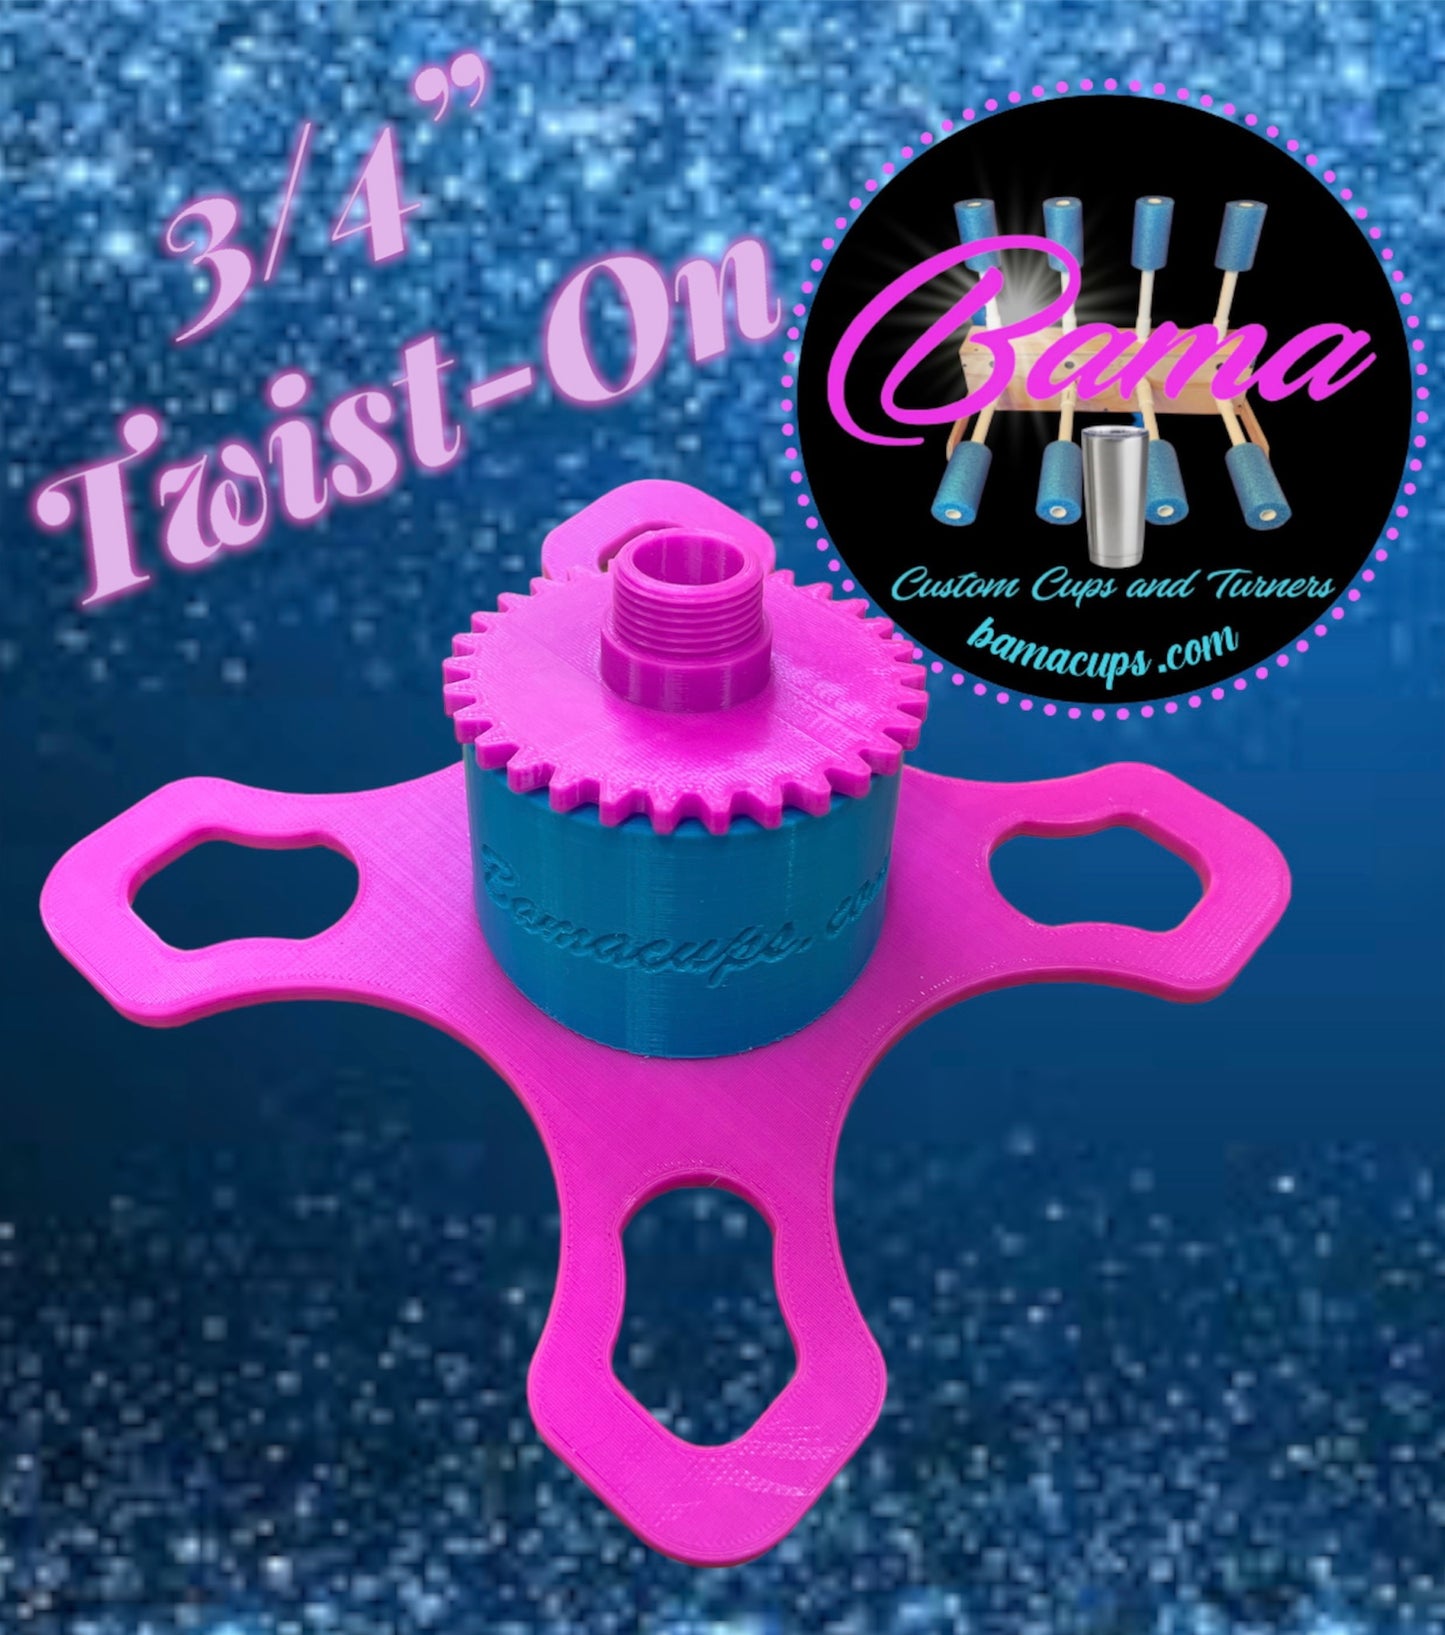 The "Bling Thing" Compact Tilted Manual Turner for Placing Rhinestones